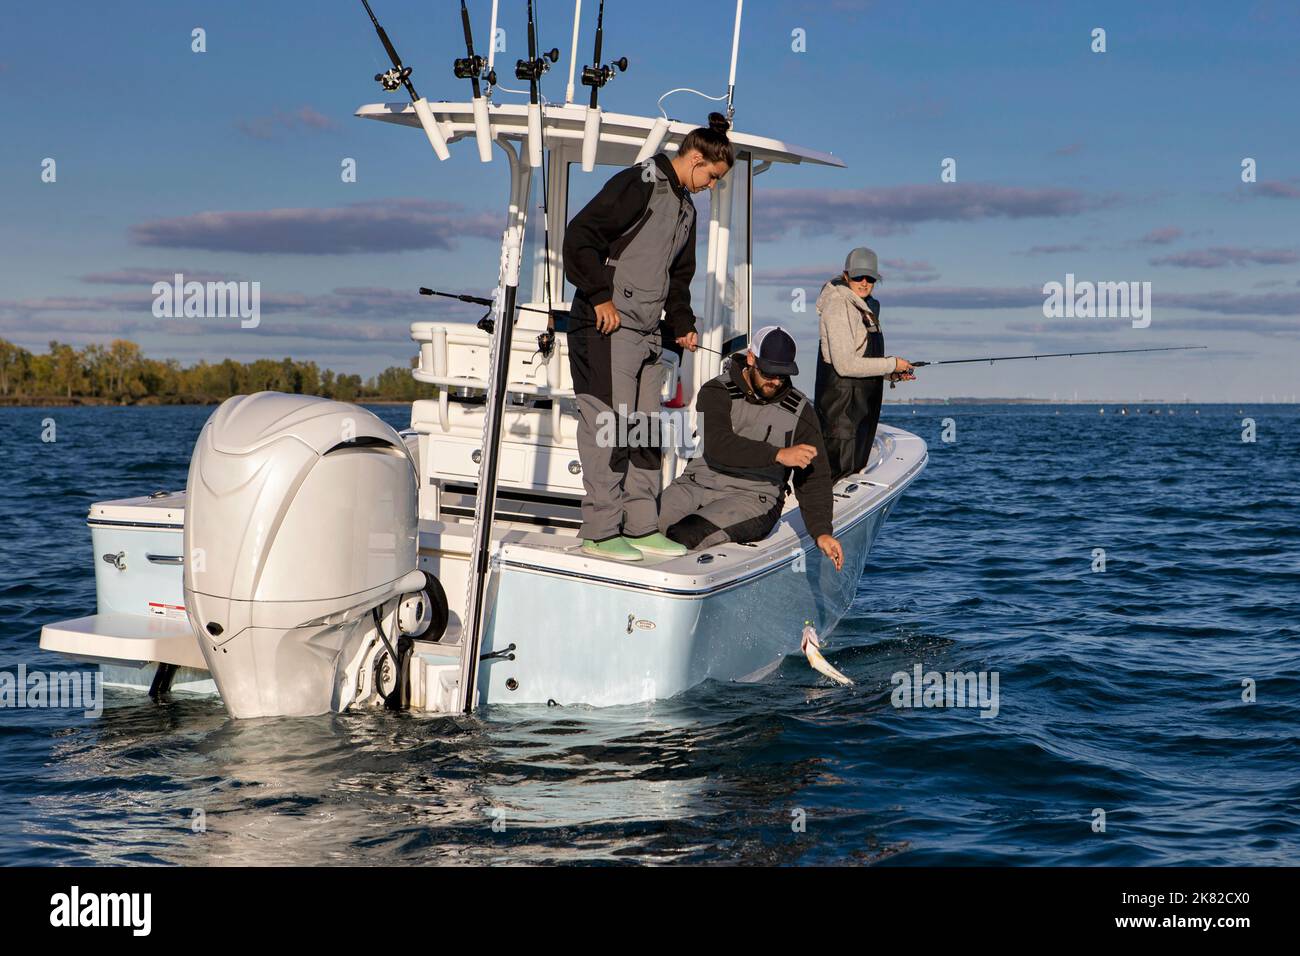 People on a boat catching a fish. Stock Photo